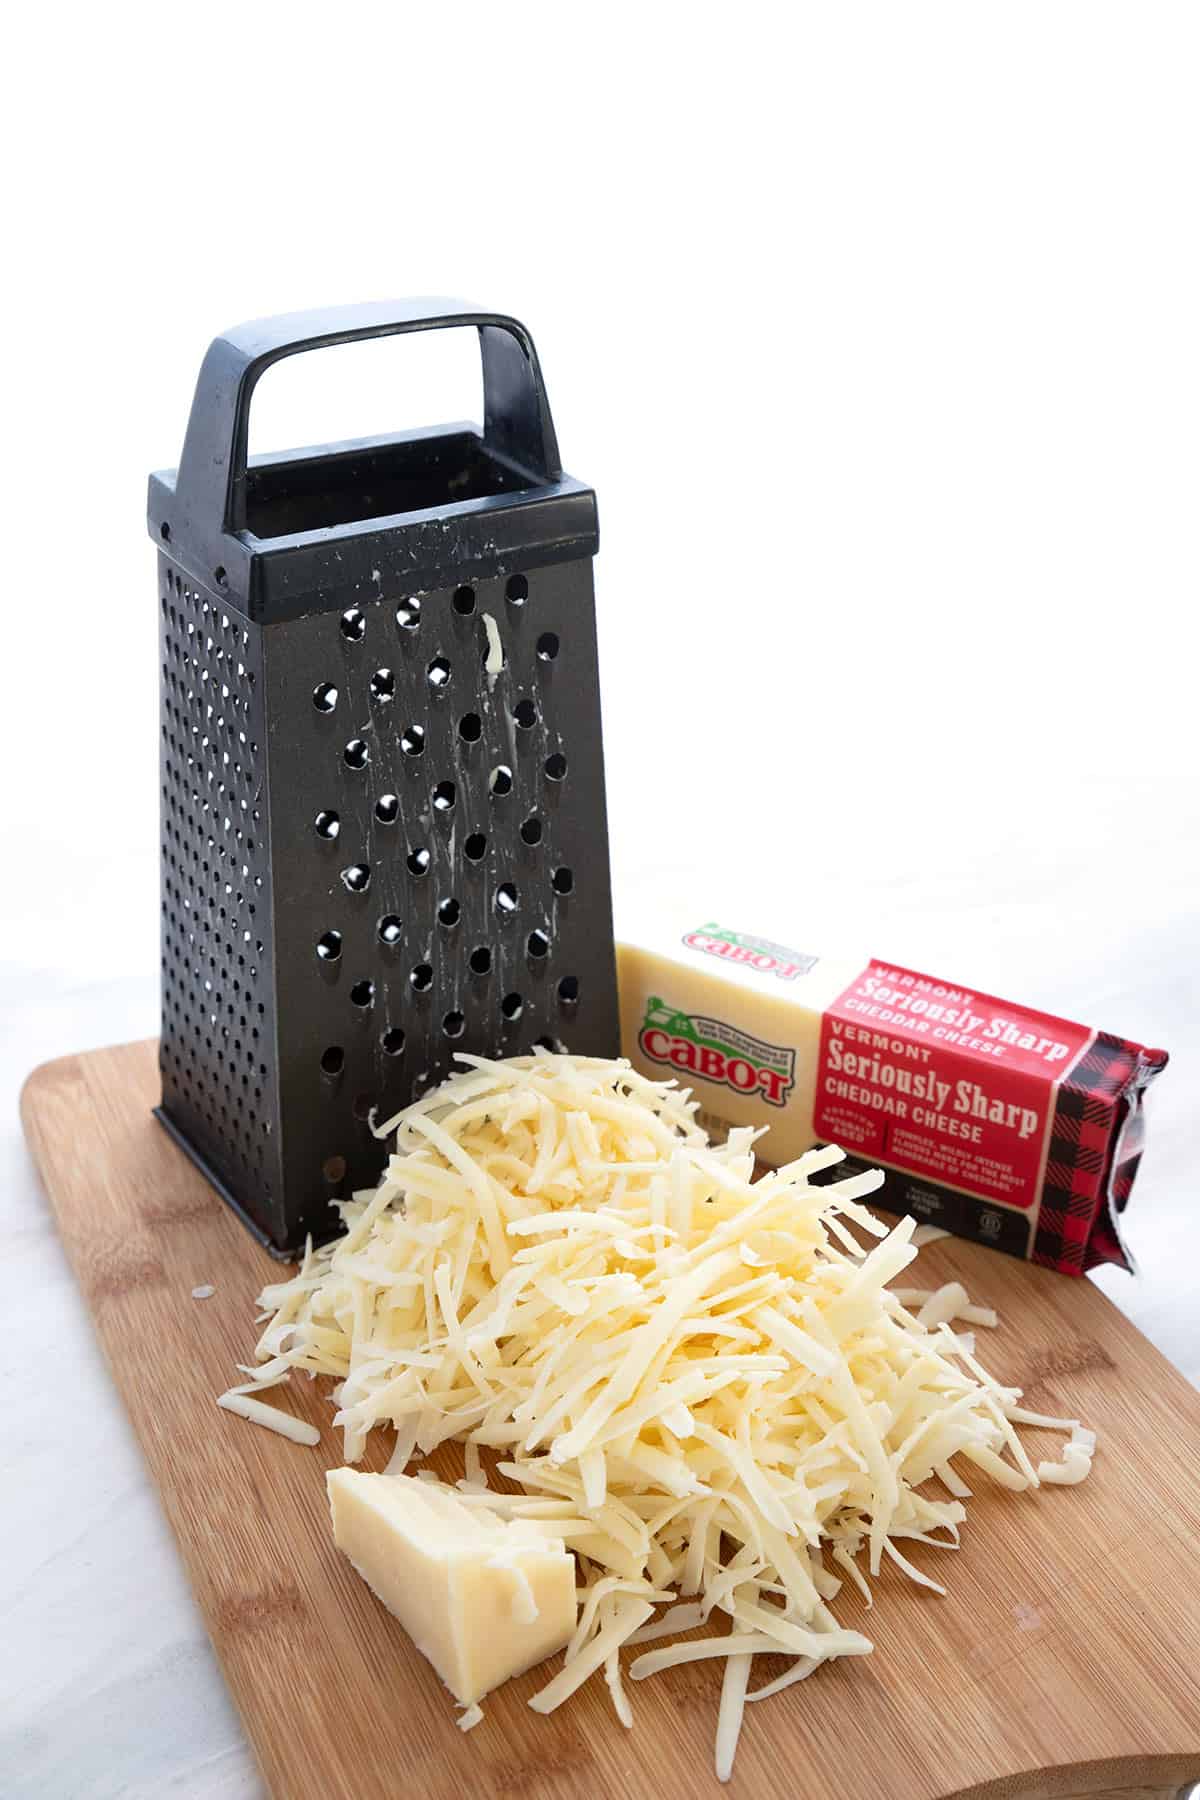 A cutting board with grated cheddar and a cheese grater.